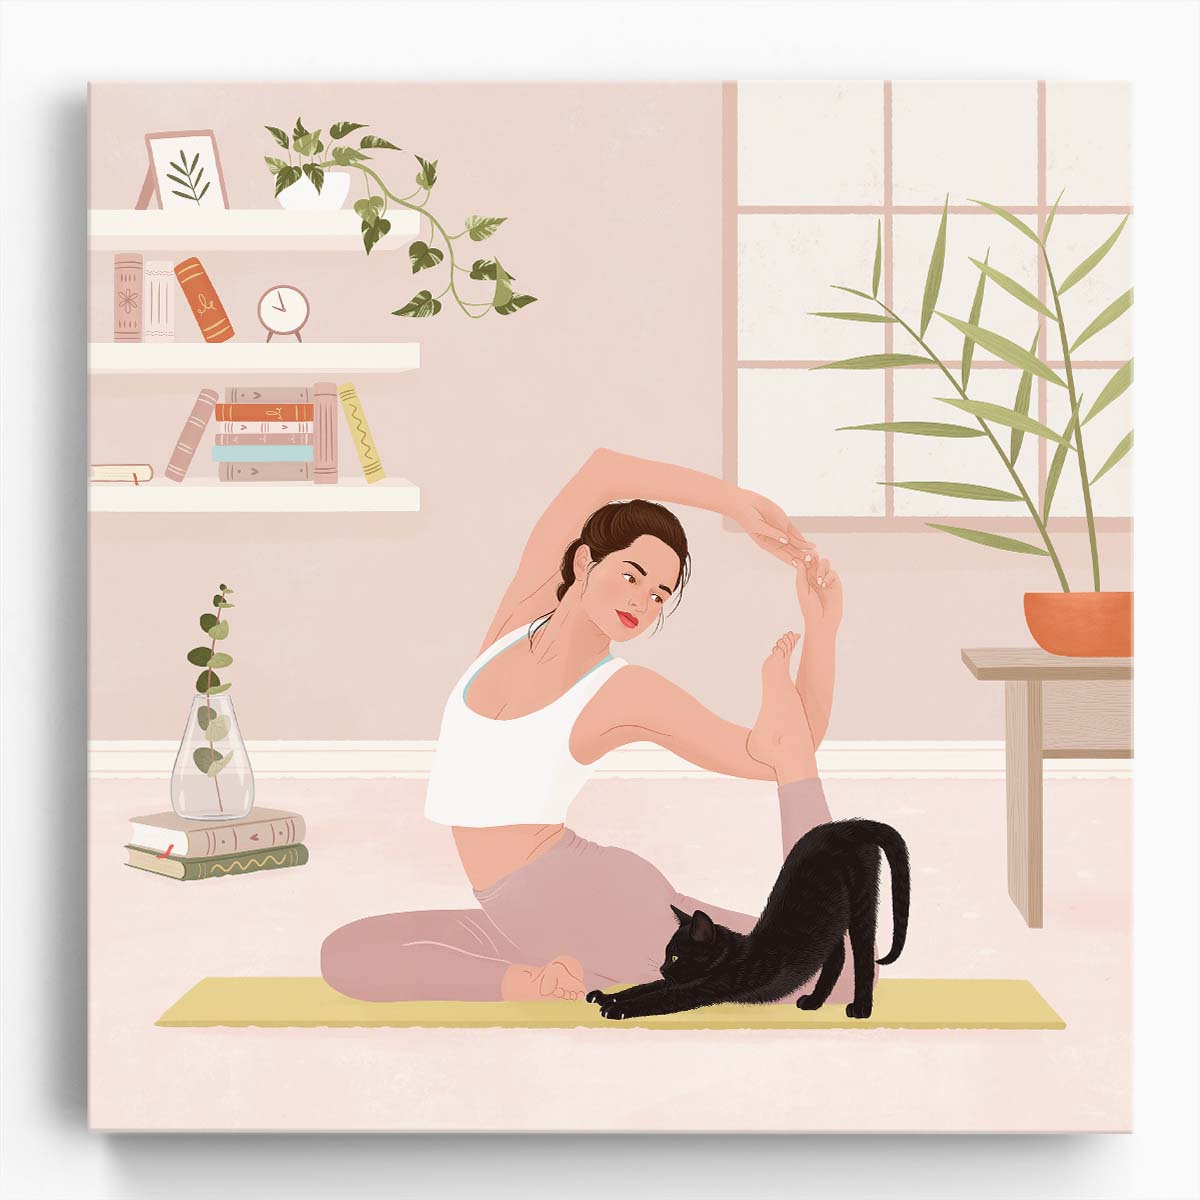 Cat and Plants Mindful Yoga Pose Illustration Wall Art by Luxuriance Designs. Made in USA.